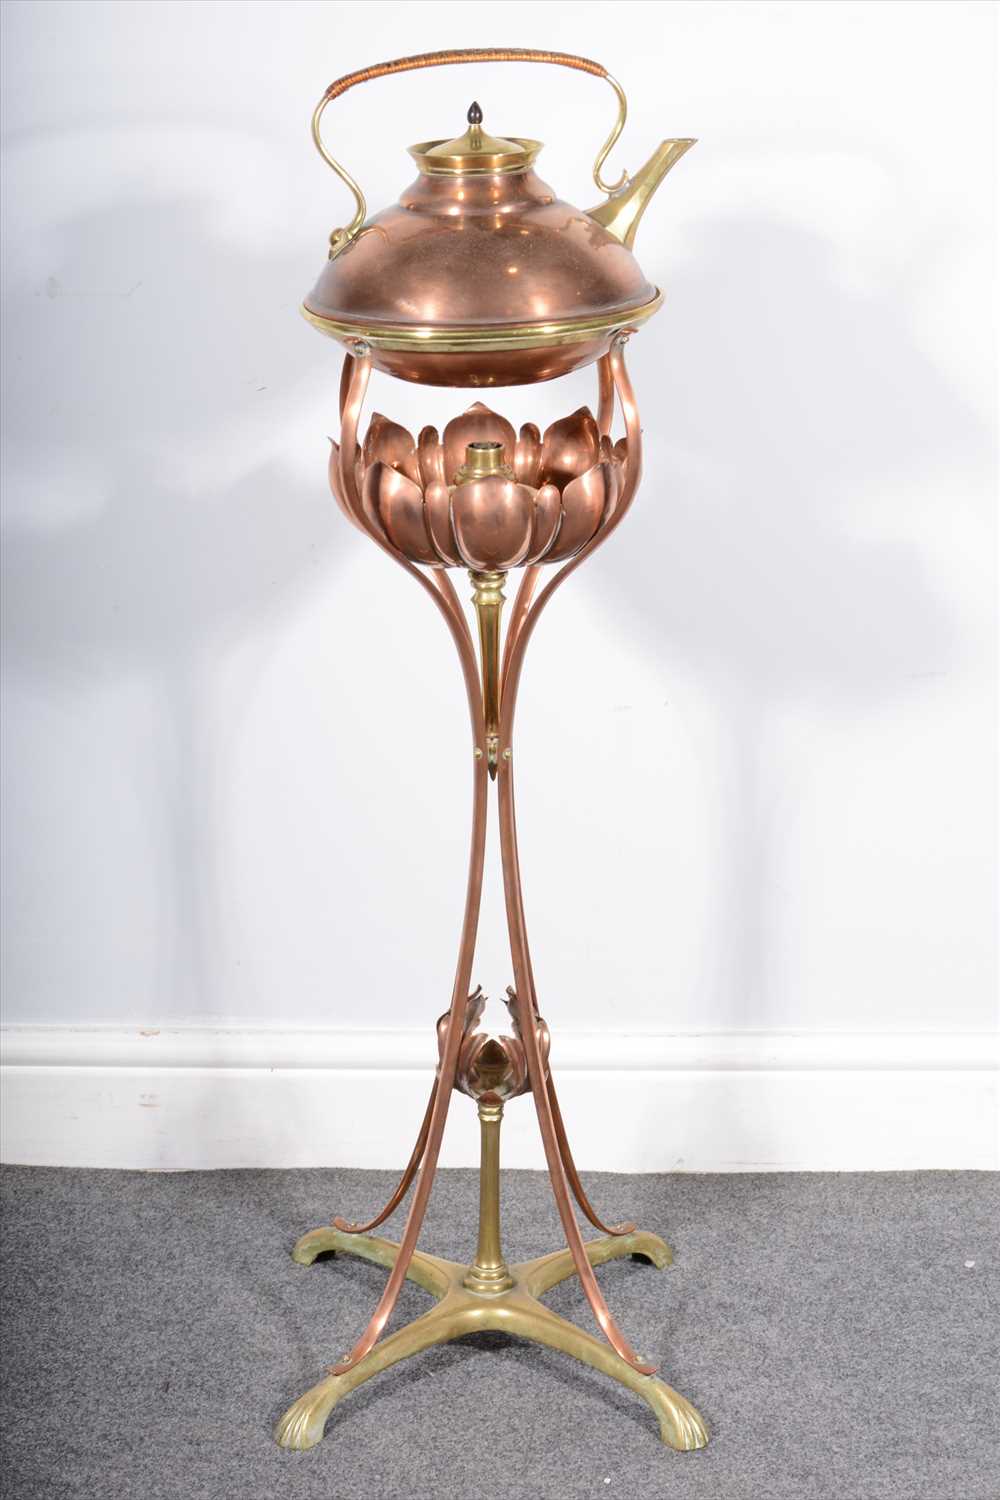 Lot 76 - An English Art Nouveau copper spirit kettle, attributed to W.A.S. Benson.